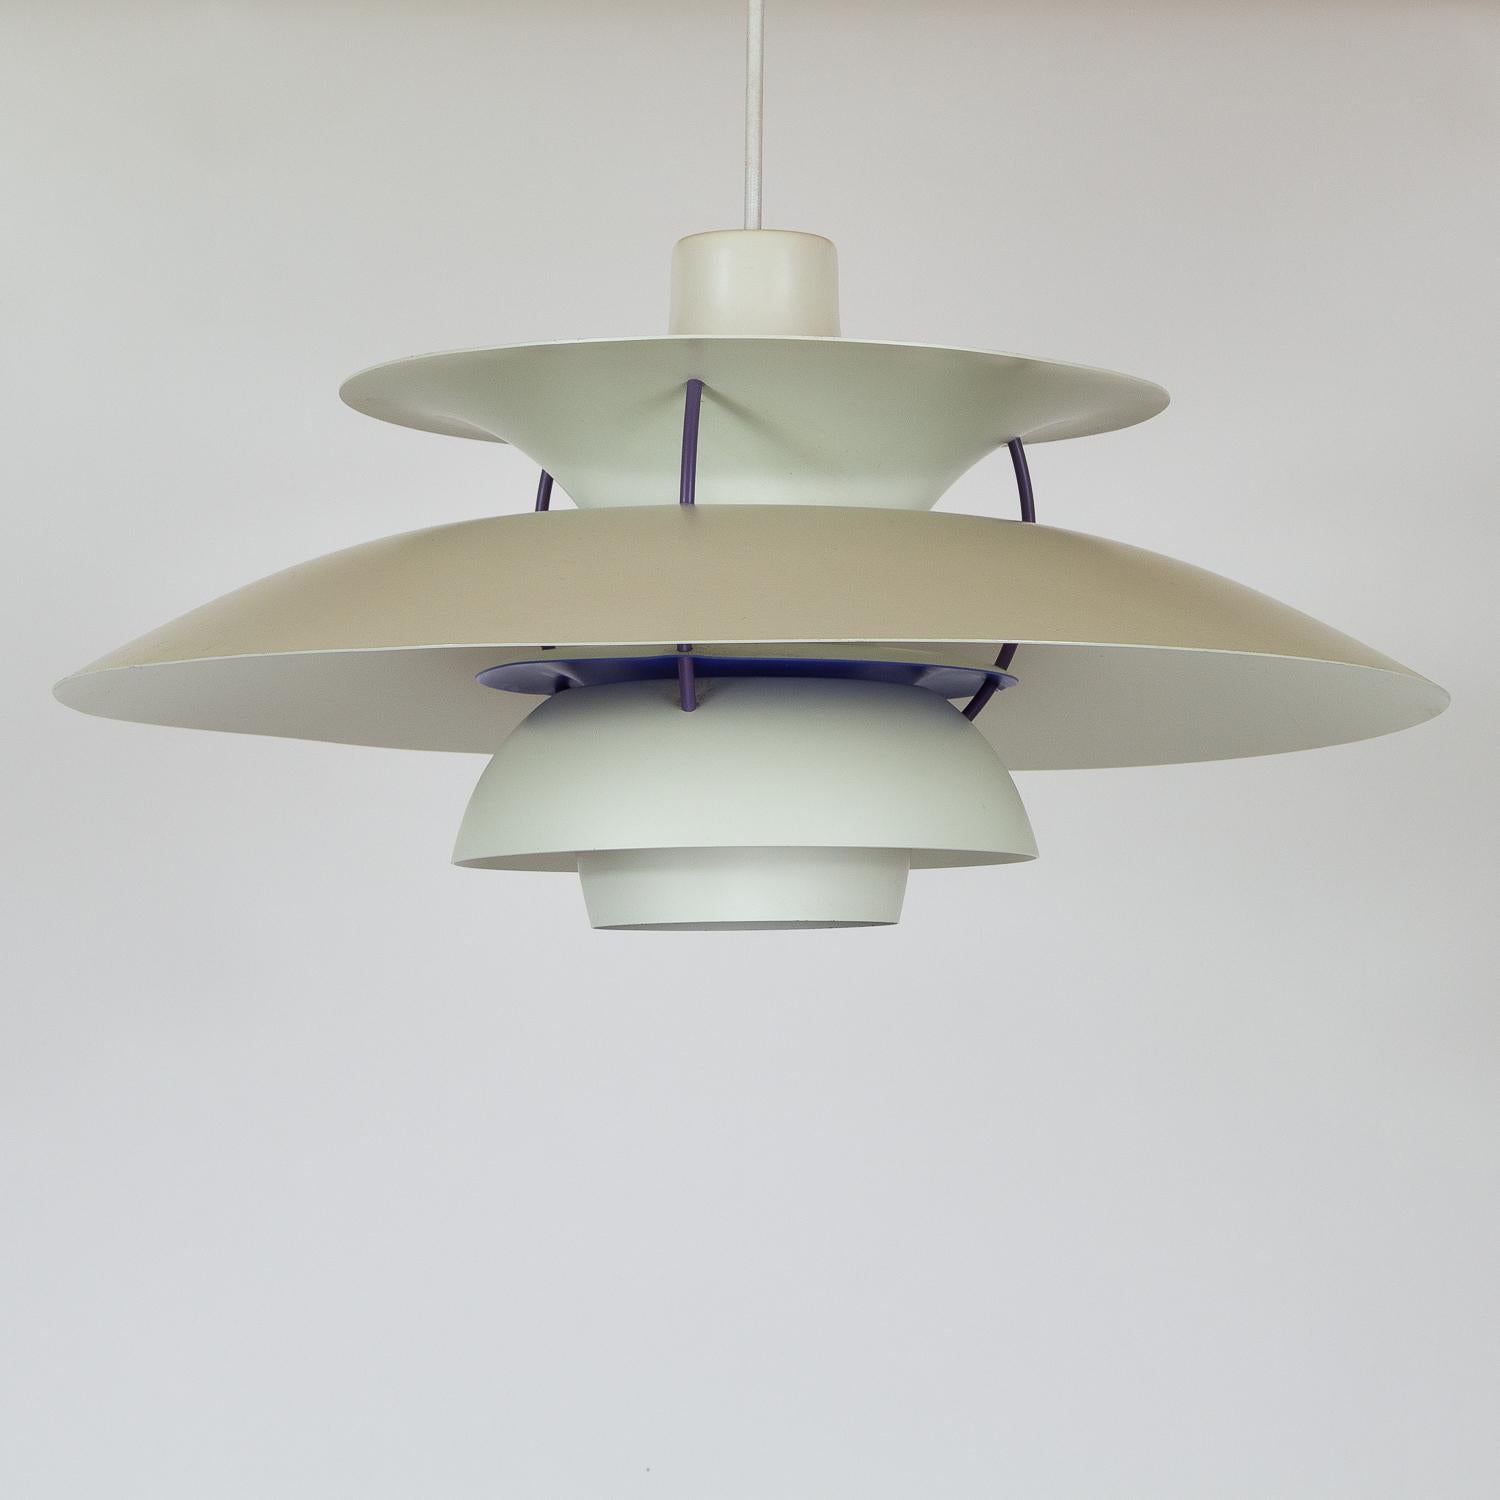 Early example white PH5 ceiling light designed by Poul Henningsen for Louis Poulsen. Designed in 1958 the PH5 is one of the most iconic Danish pendants. The layered shades have been designed to hide the bulb and prevent glare and the interior is red